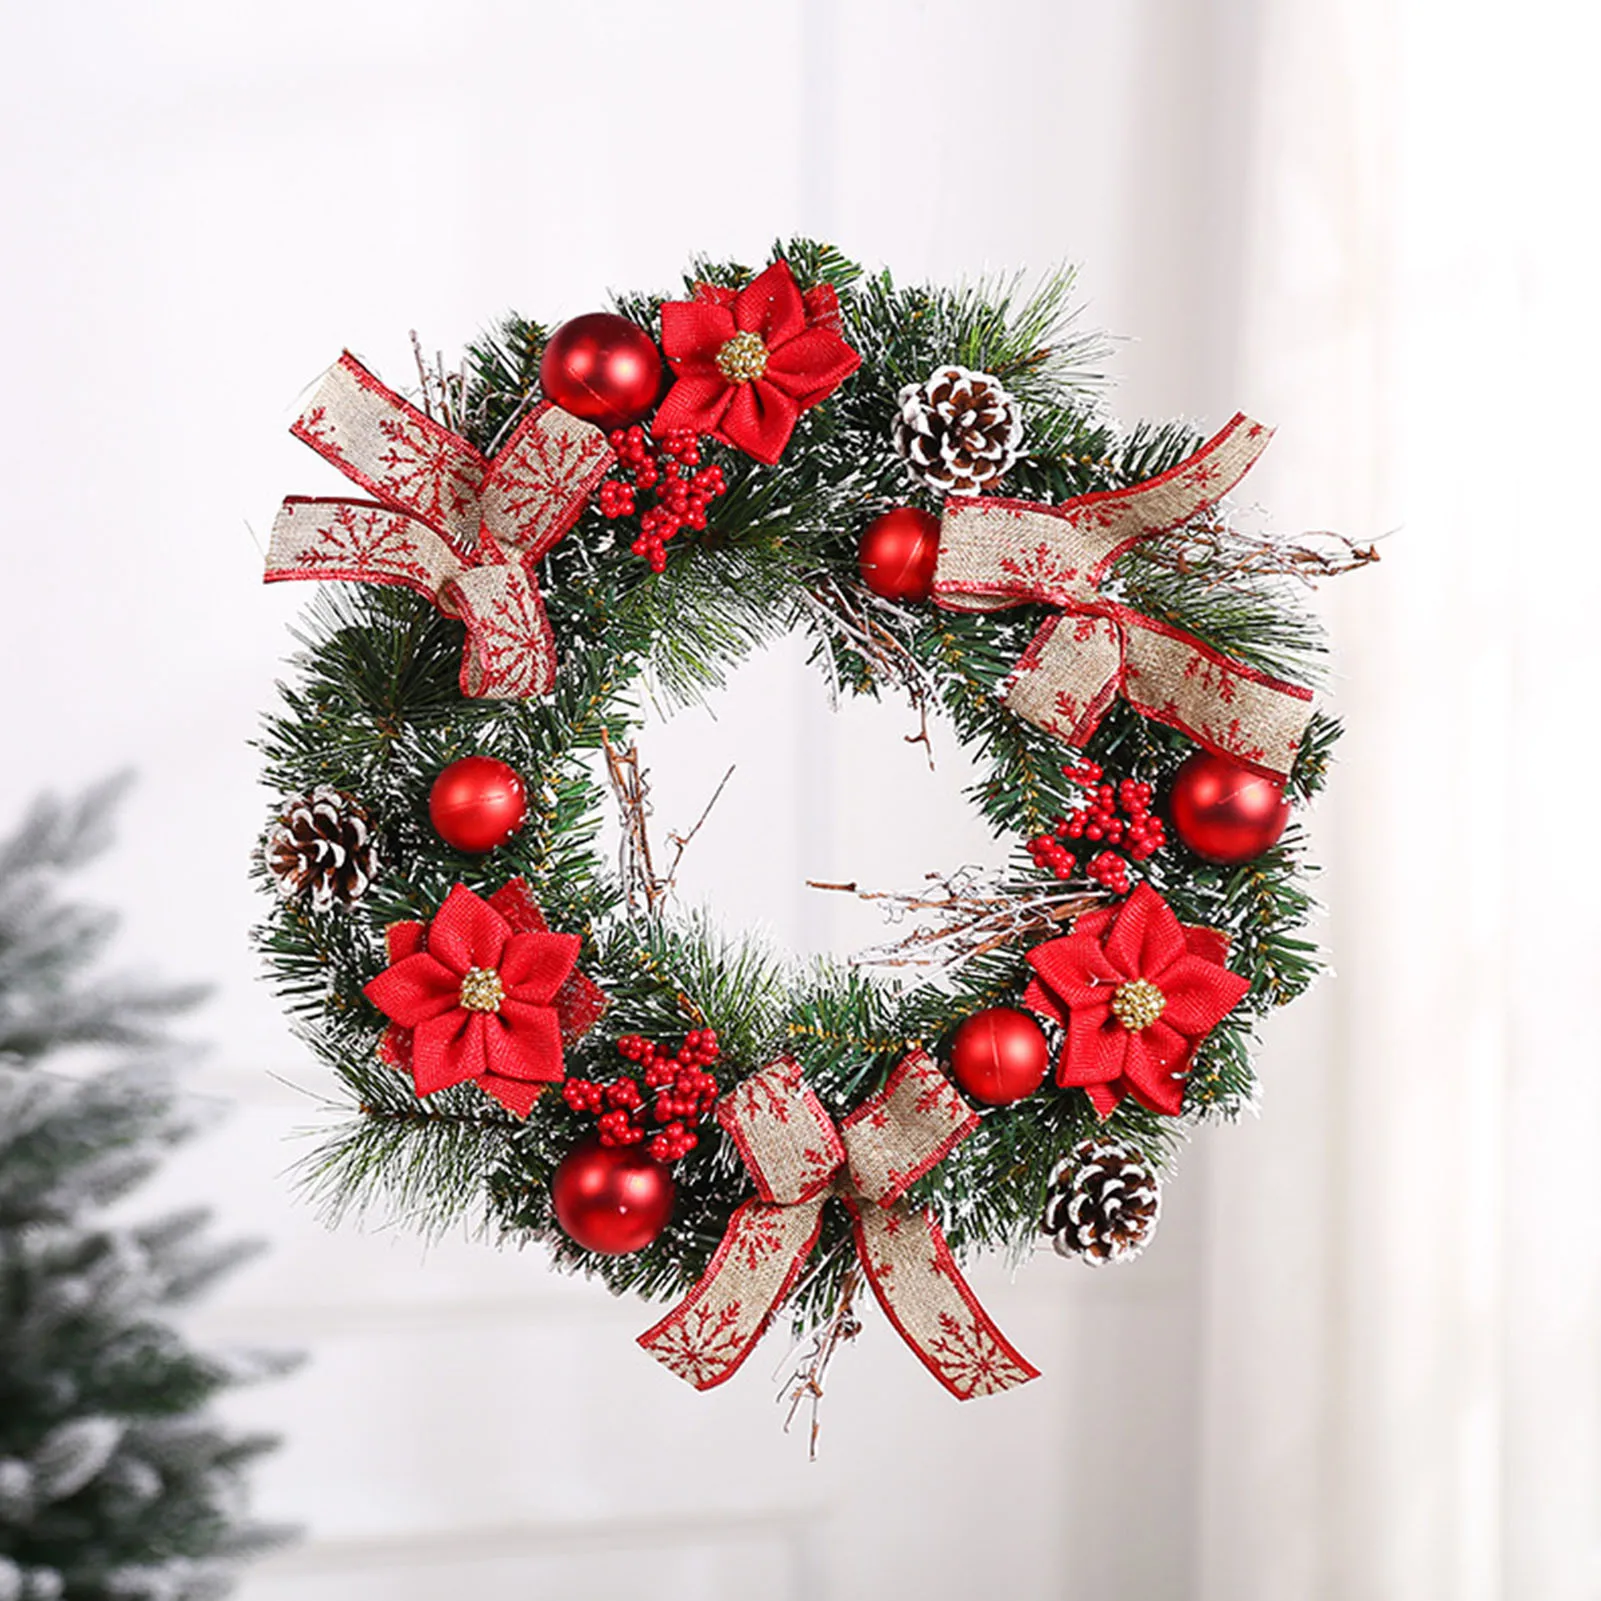 

Winter Wreaths For Front Door Floral Christmas Artificial Wreath Realistic Pine Needles Red Berries Bows Garland For Christmas